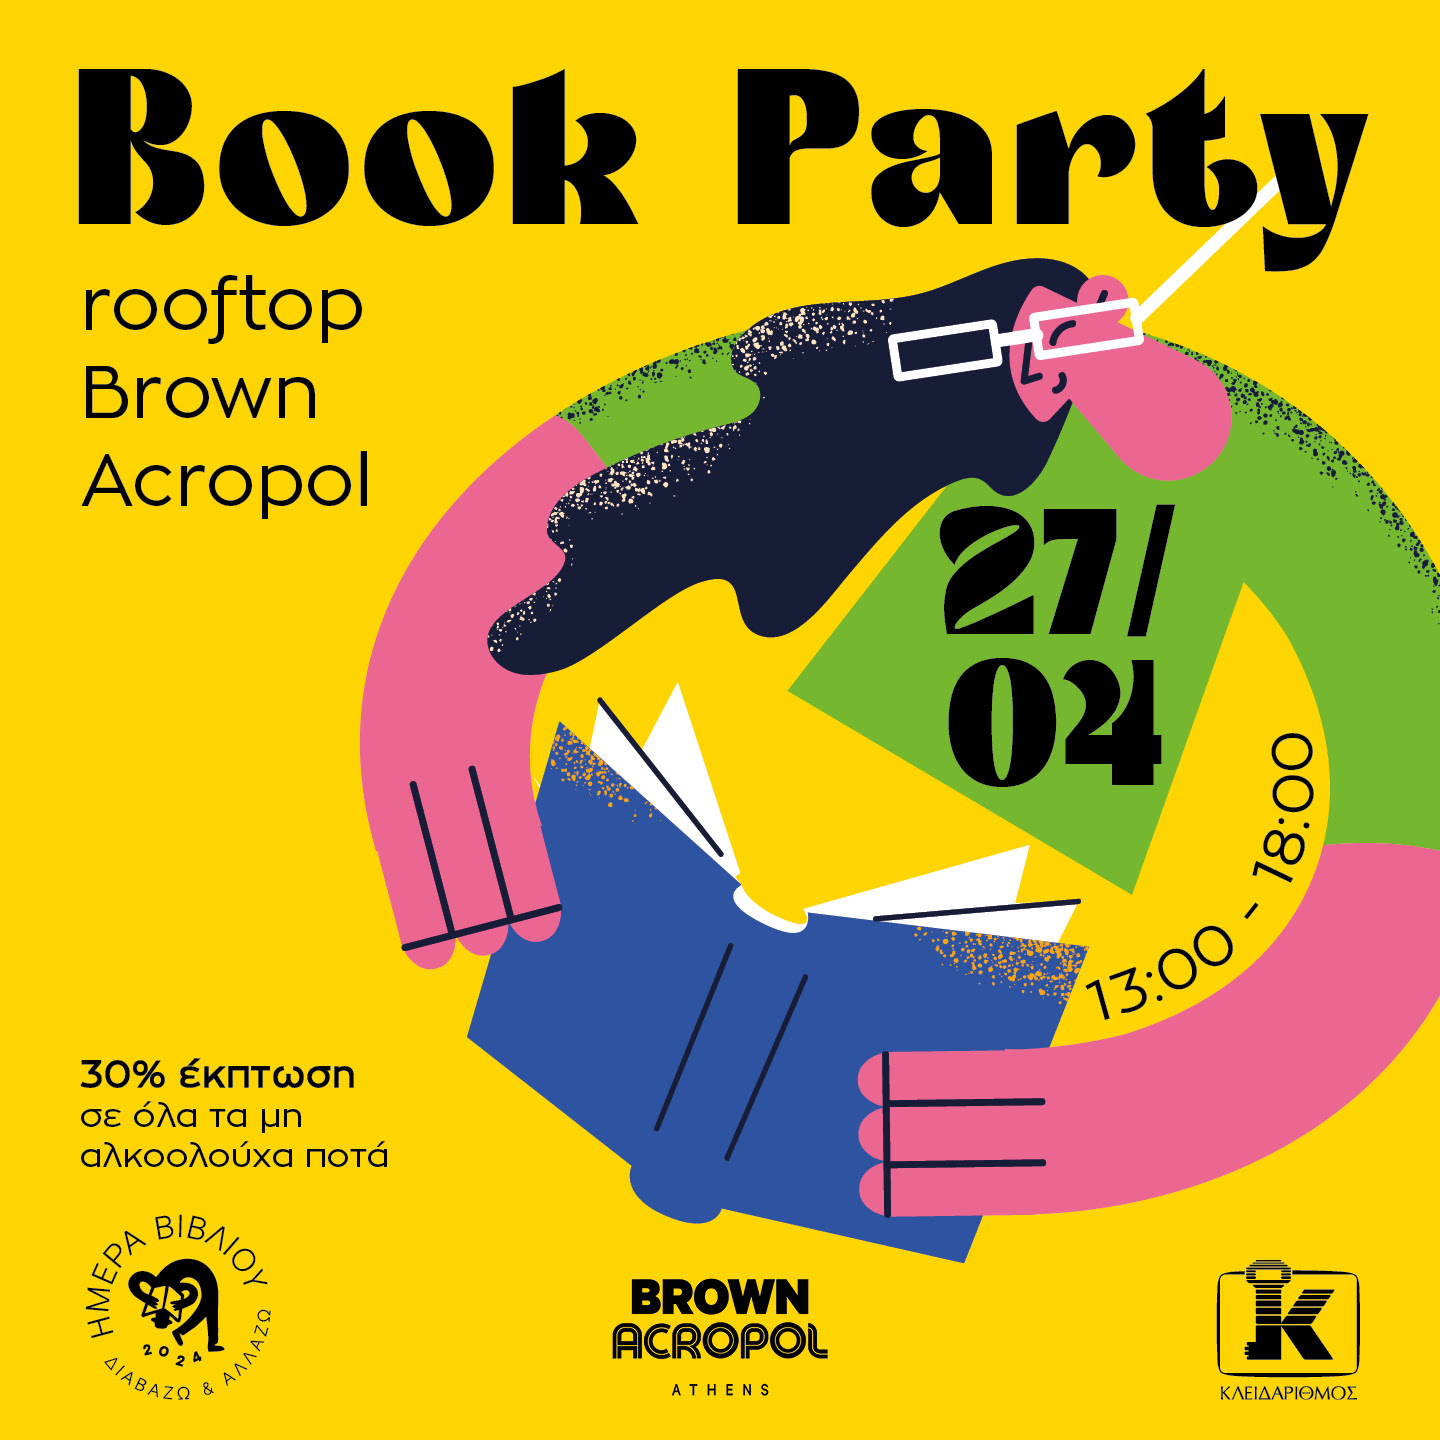 Bookparty at rooftop Brown Acropol